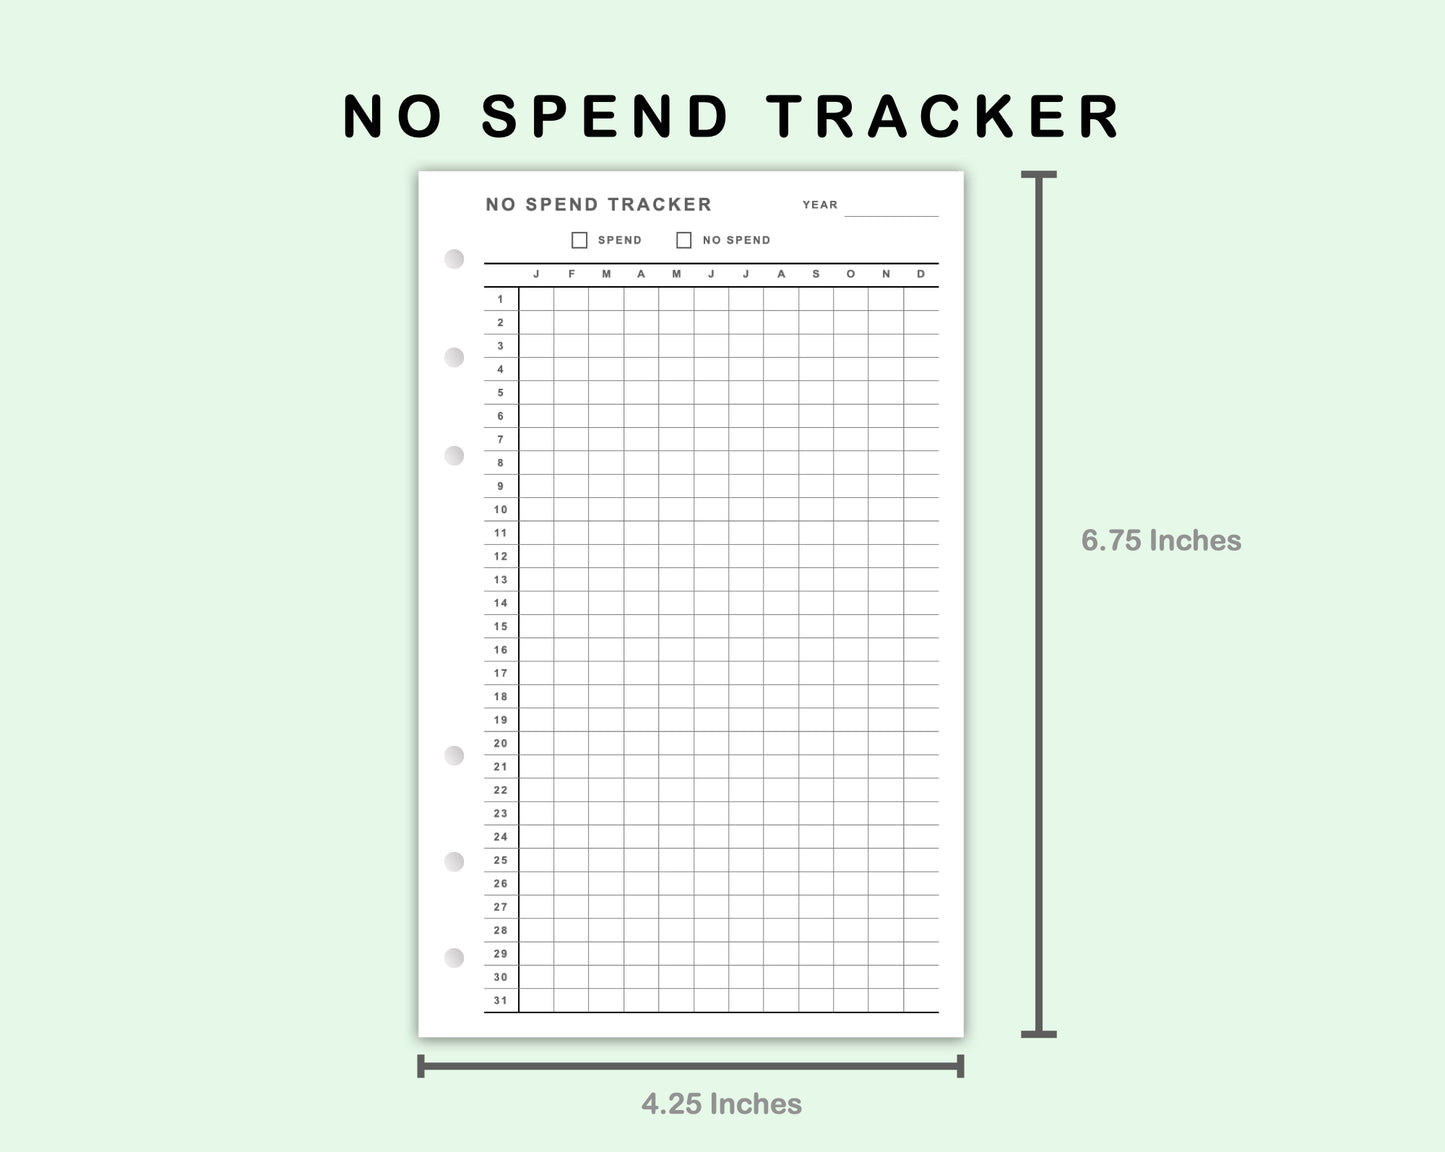 FC Compact Inserts - No Spend Tracker